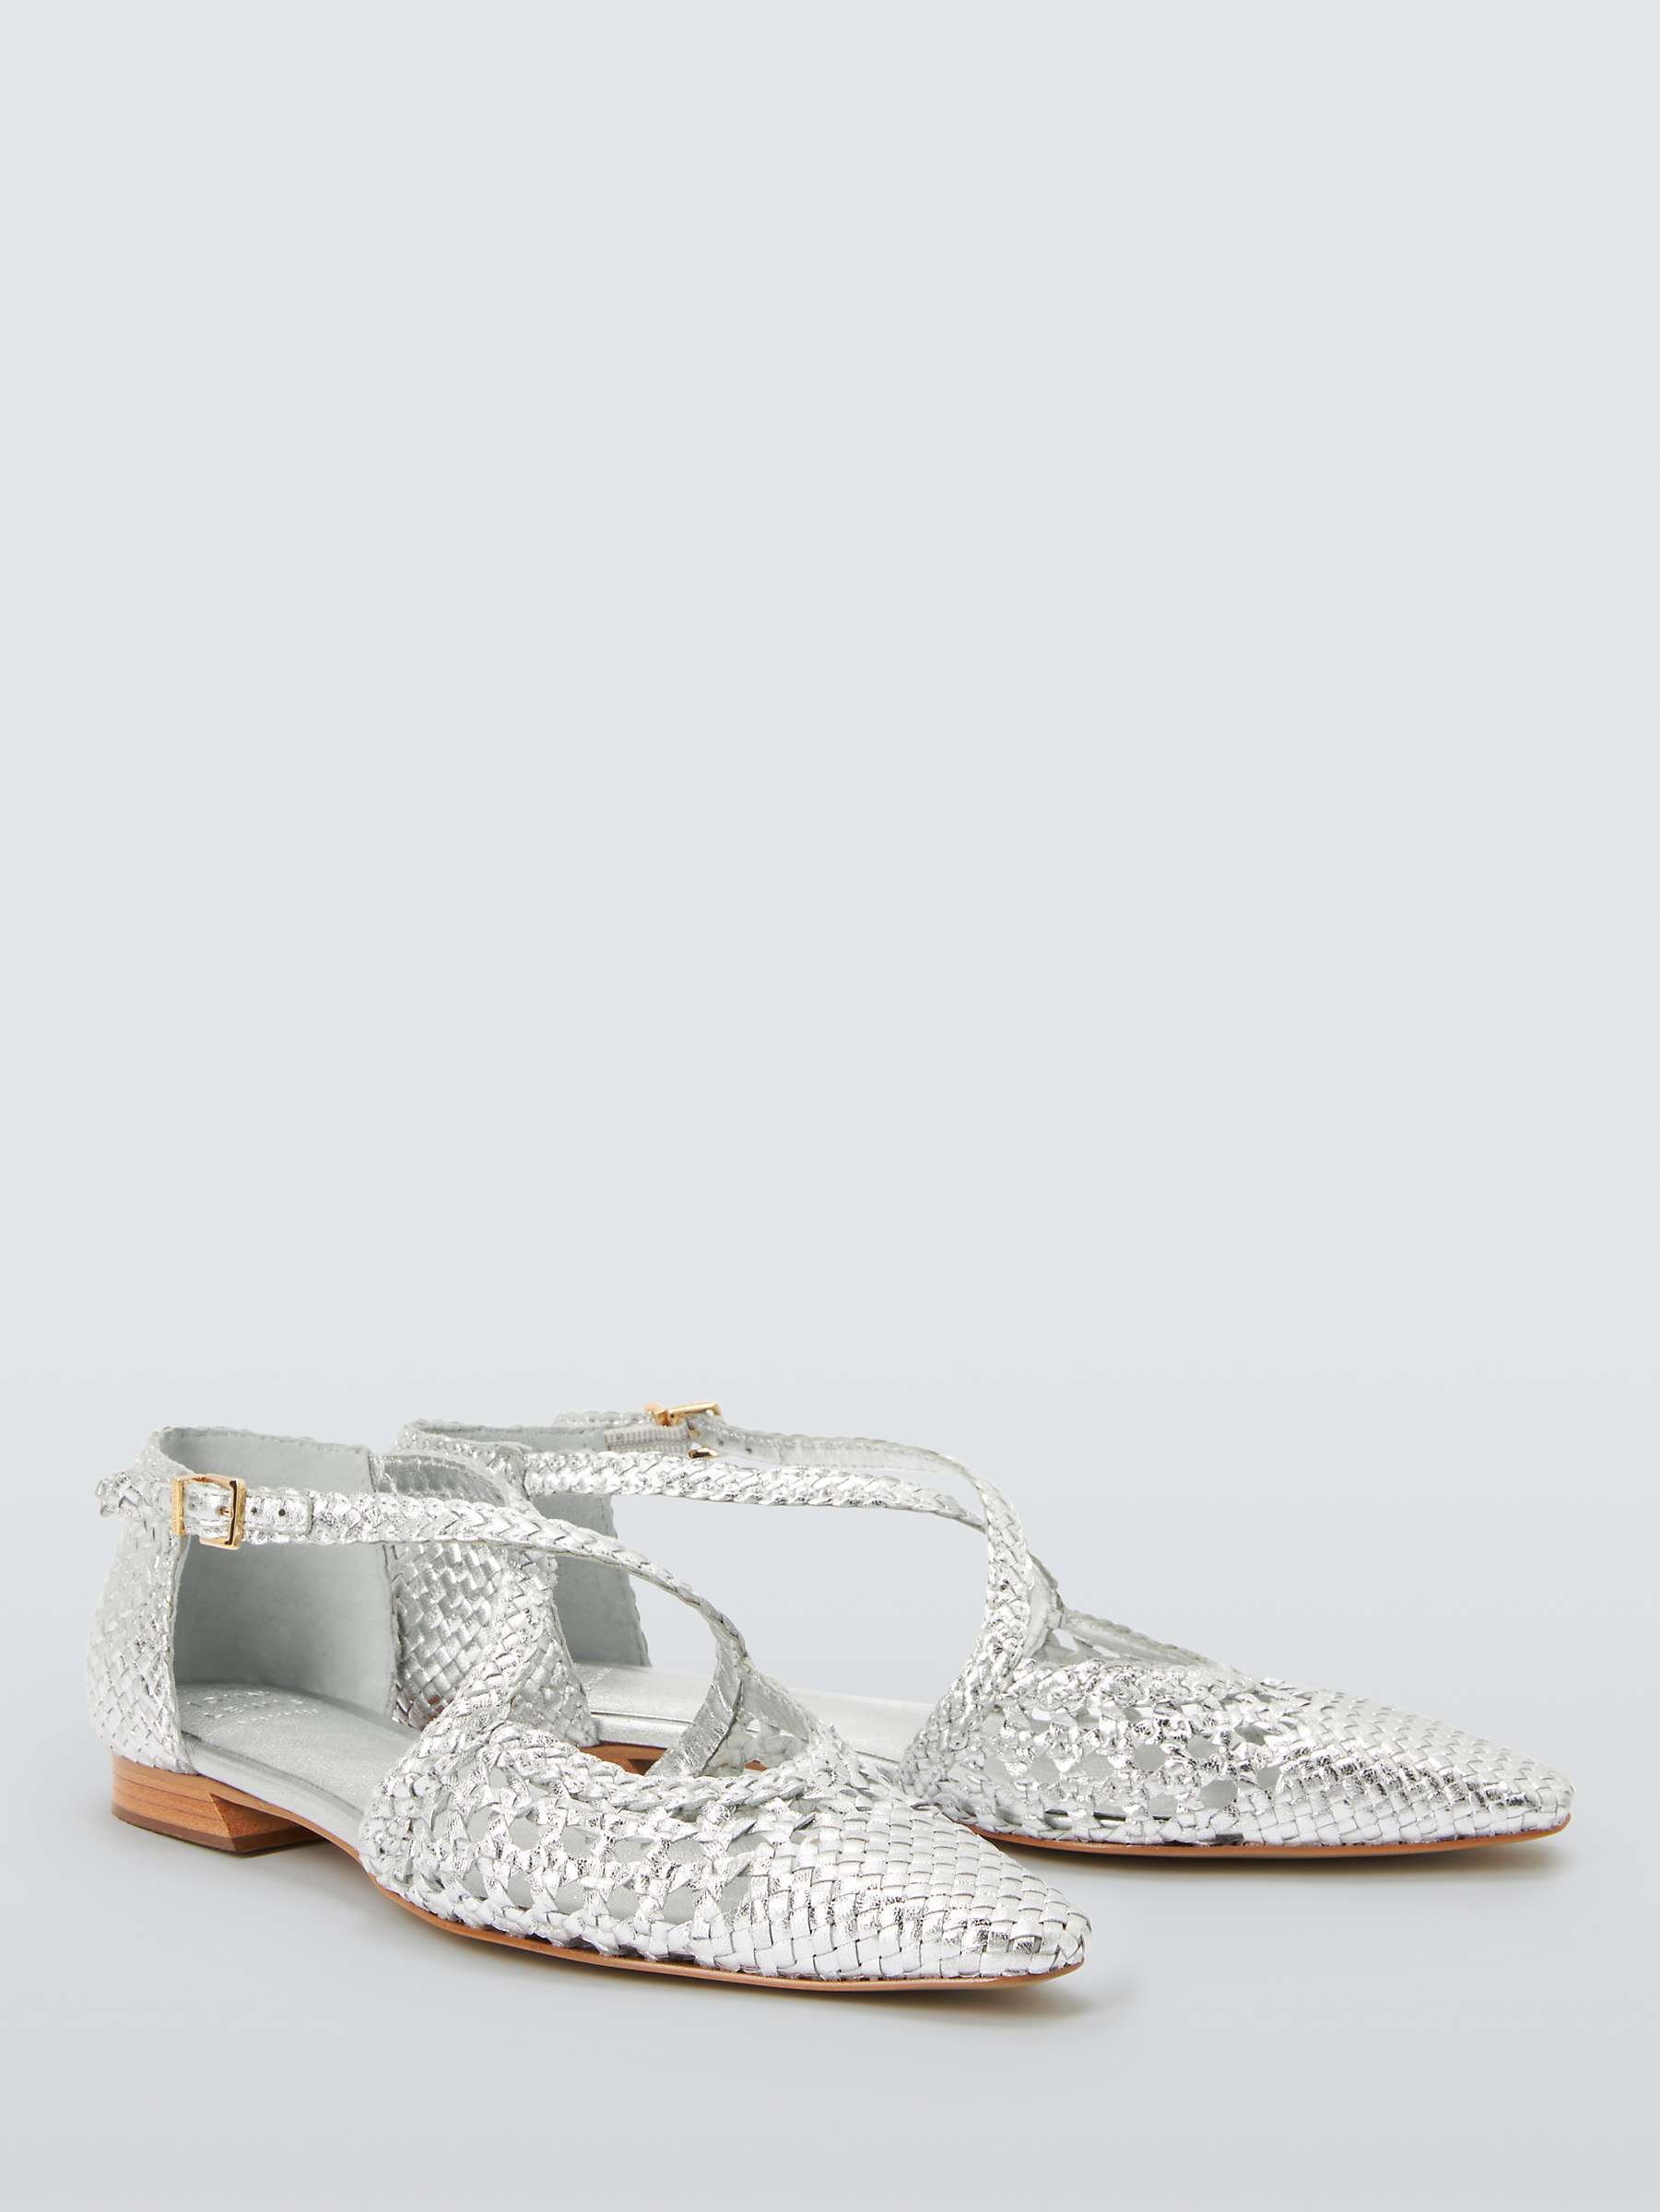 Buy John Lewis Happie Leather Woven Cross Strap Pointed Flats, Silver Online at johnlewis.com